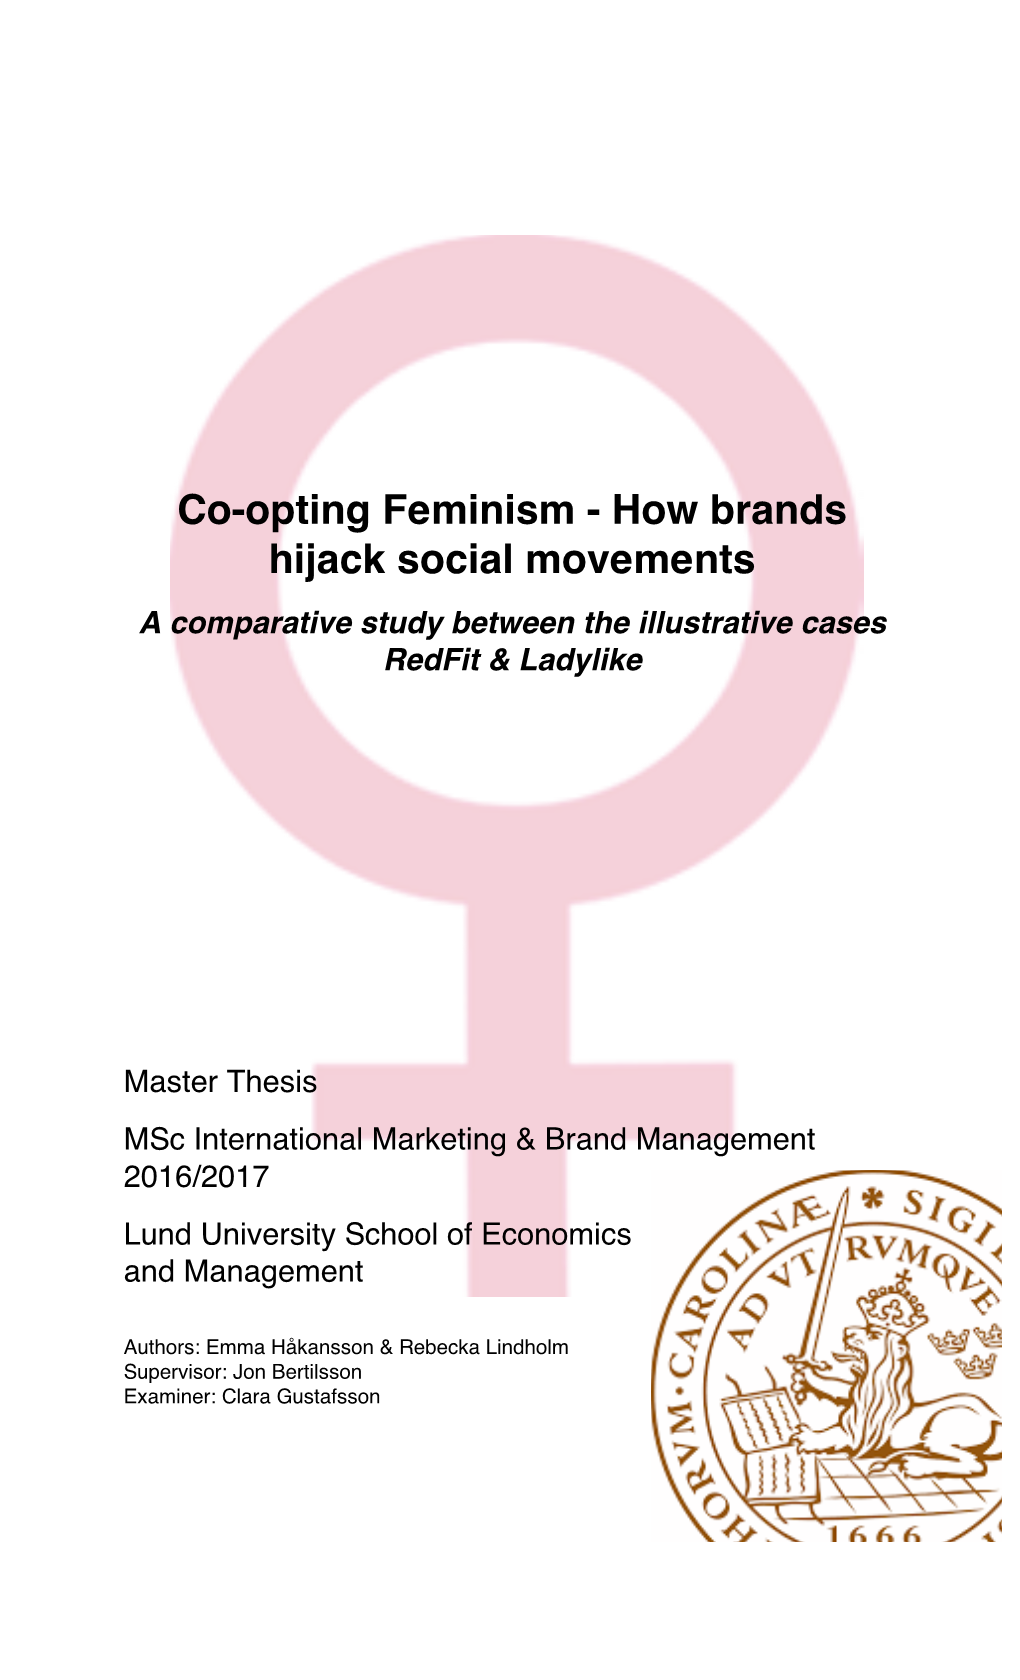 Co-Opting Feminism - How Brands Hijack Social Movements a Comparative Study Between the Illustrative Cases Redfit & Ladylike